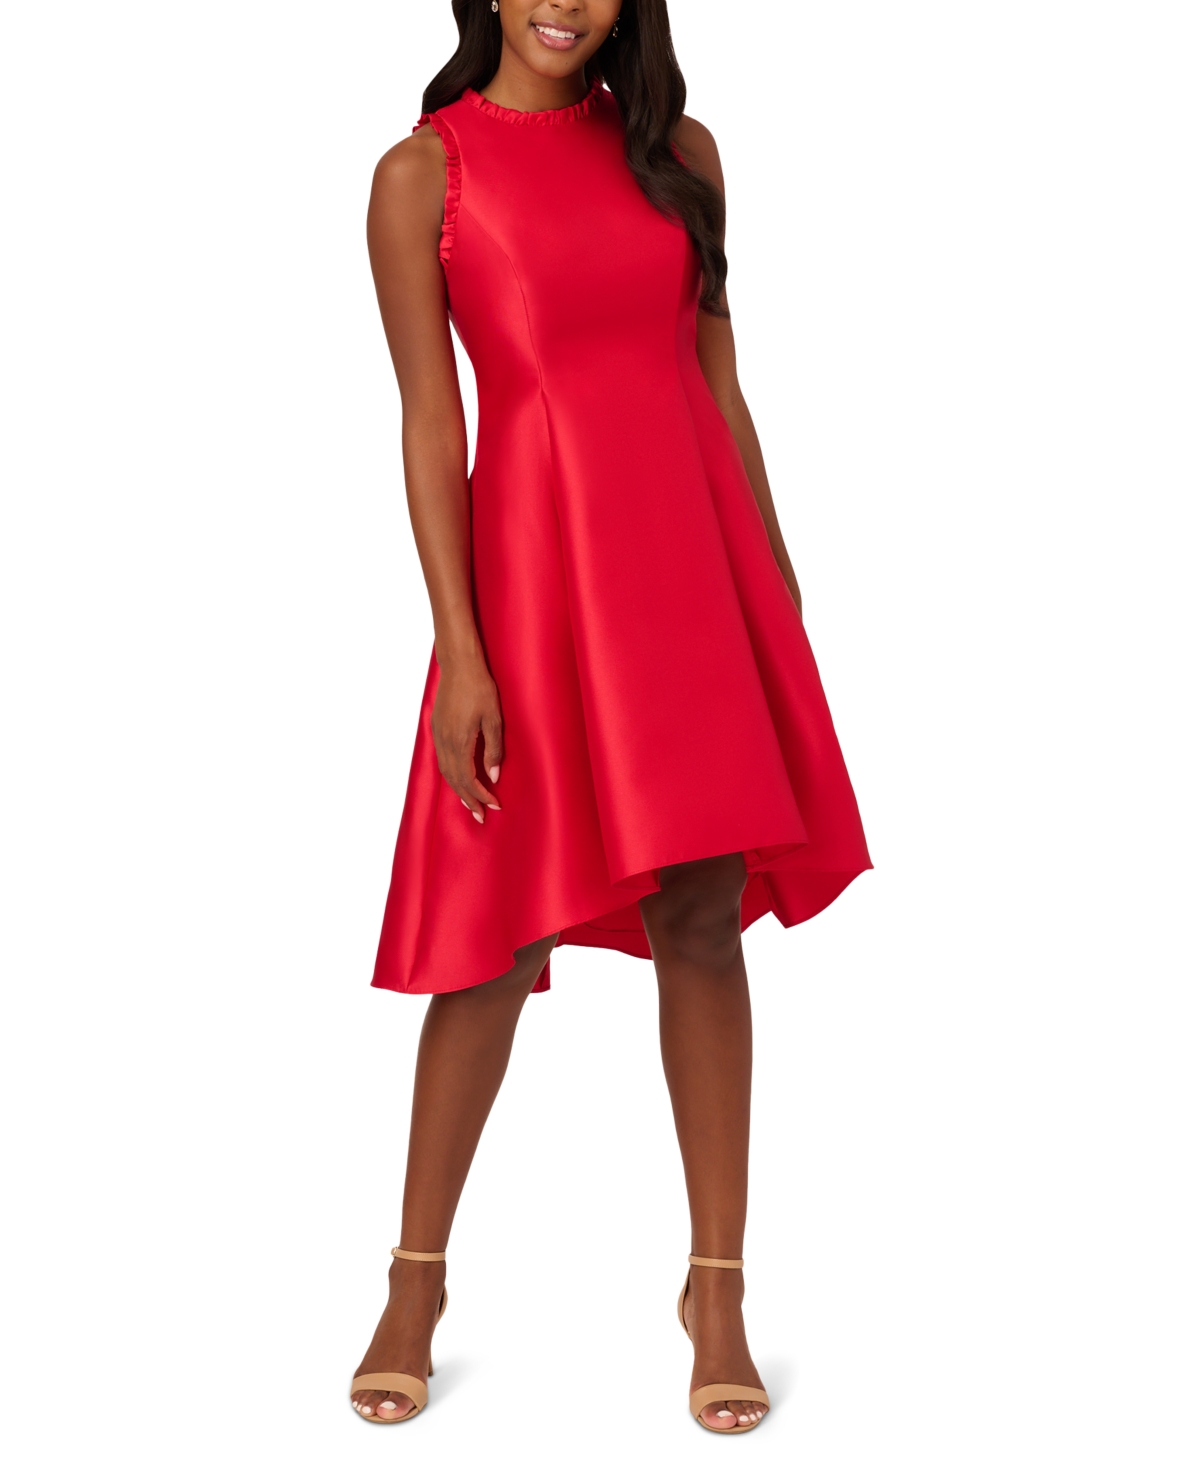 Adrianna Papell Women's Pleat-skirt Fit & Flare Dress In Red